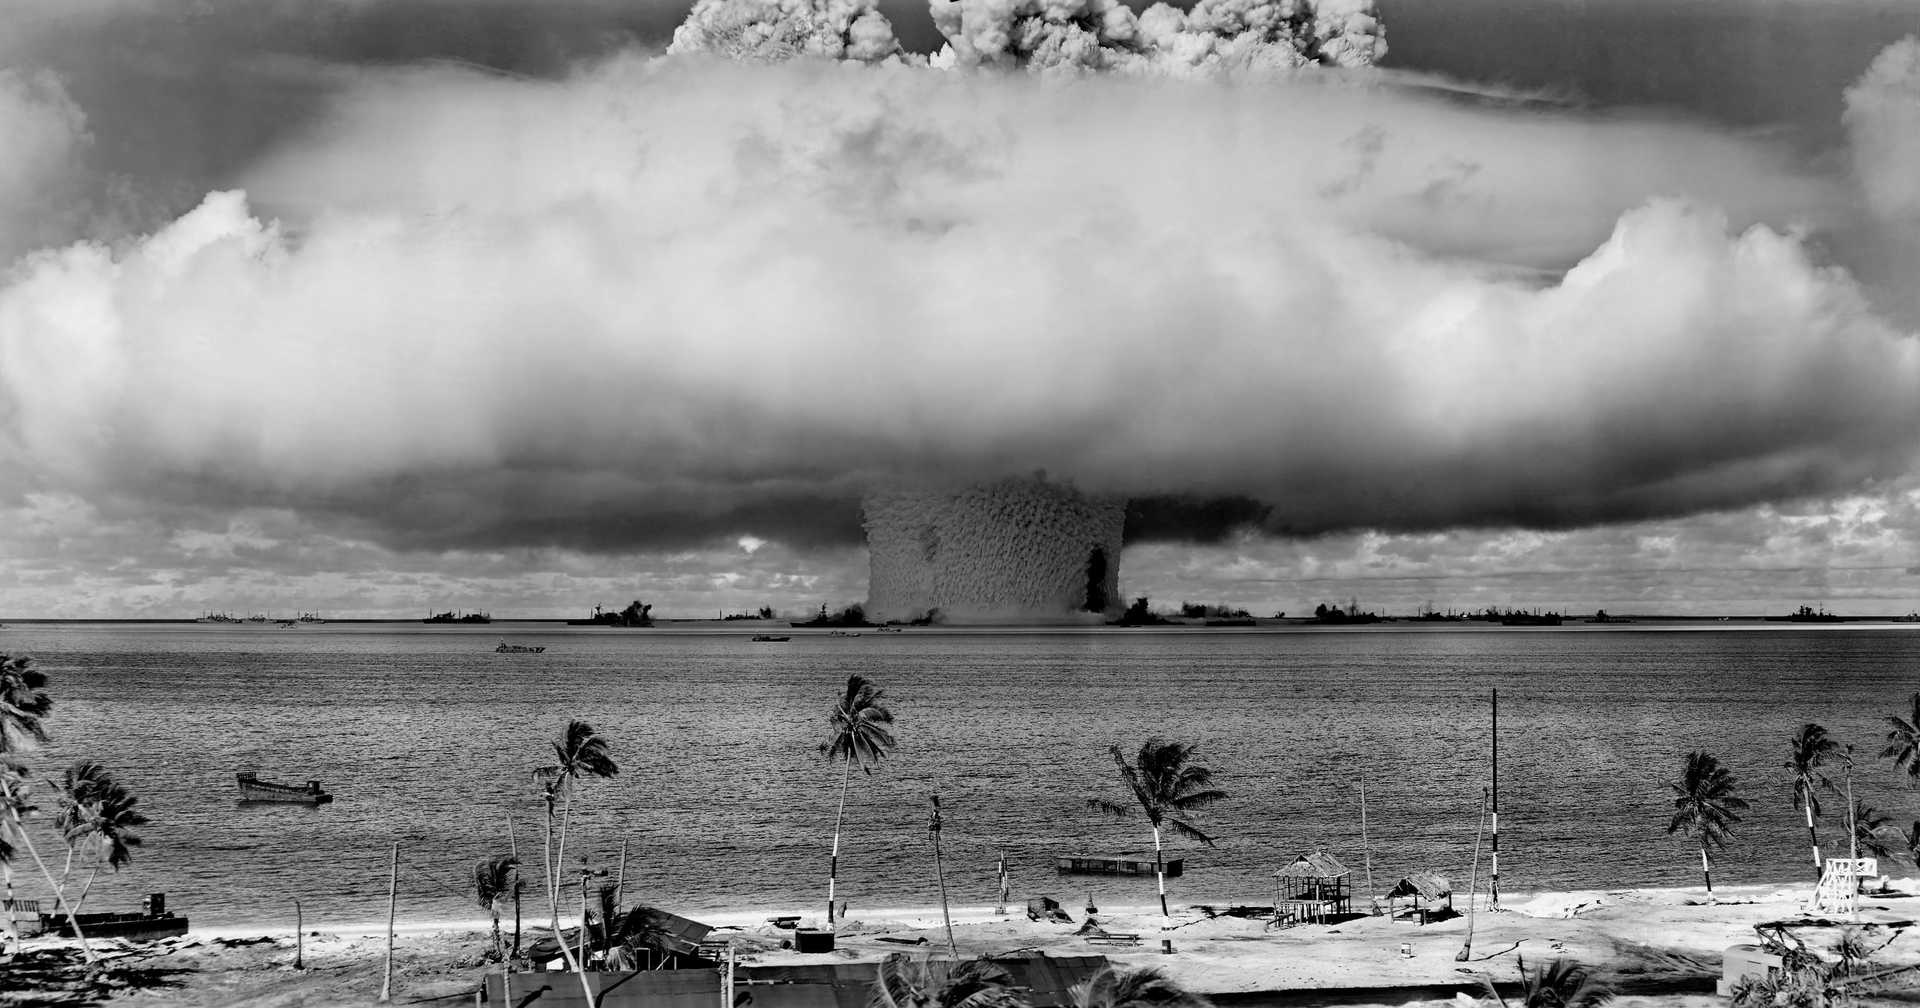 Since 1945, nuclear-armed states have detonated over 2,000 nuclear weapons, impacting communities around the world.